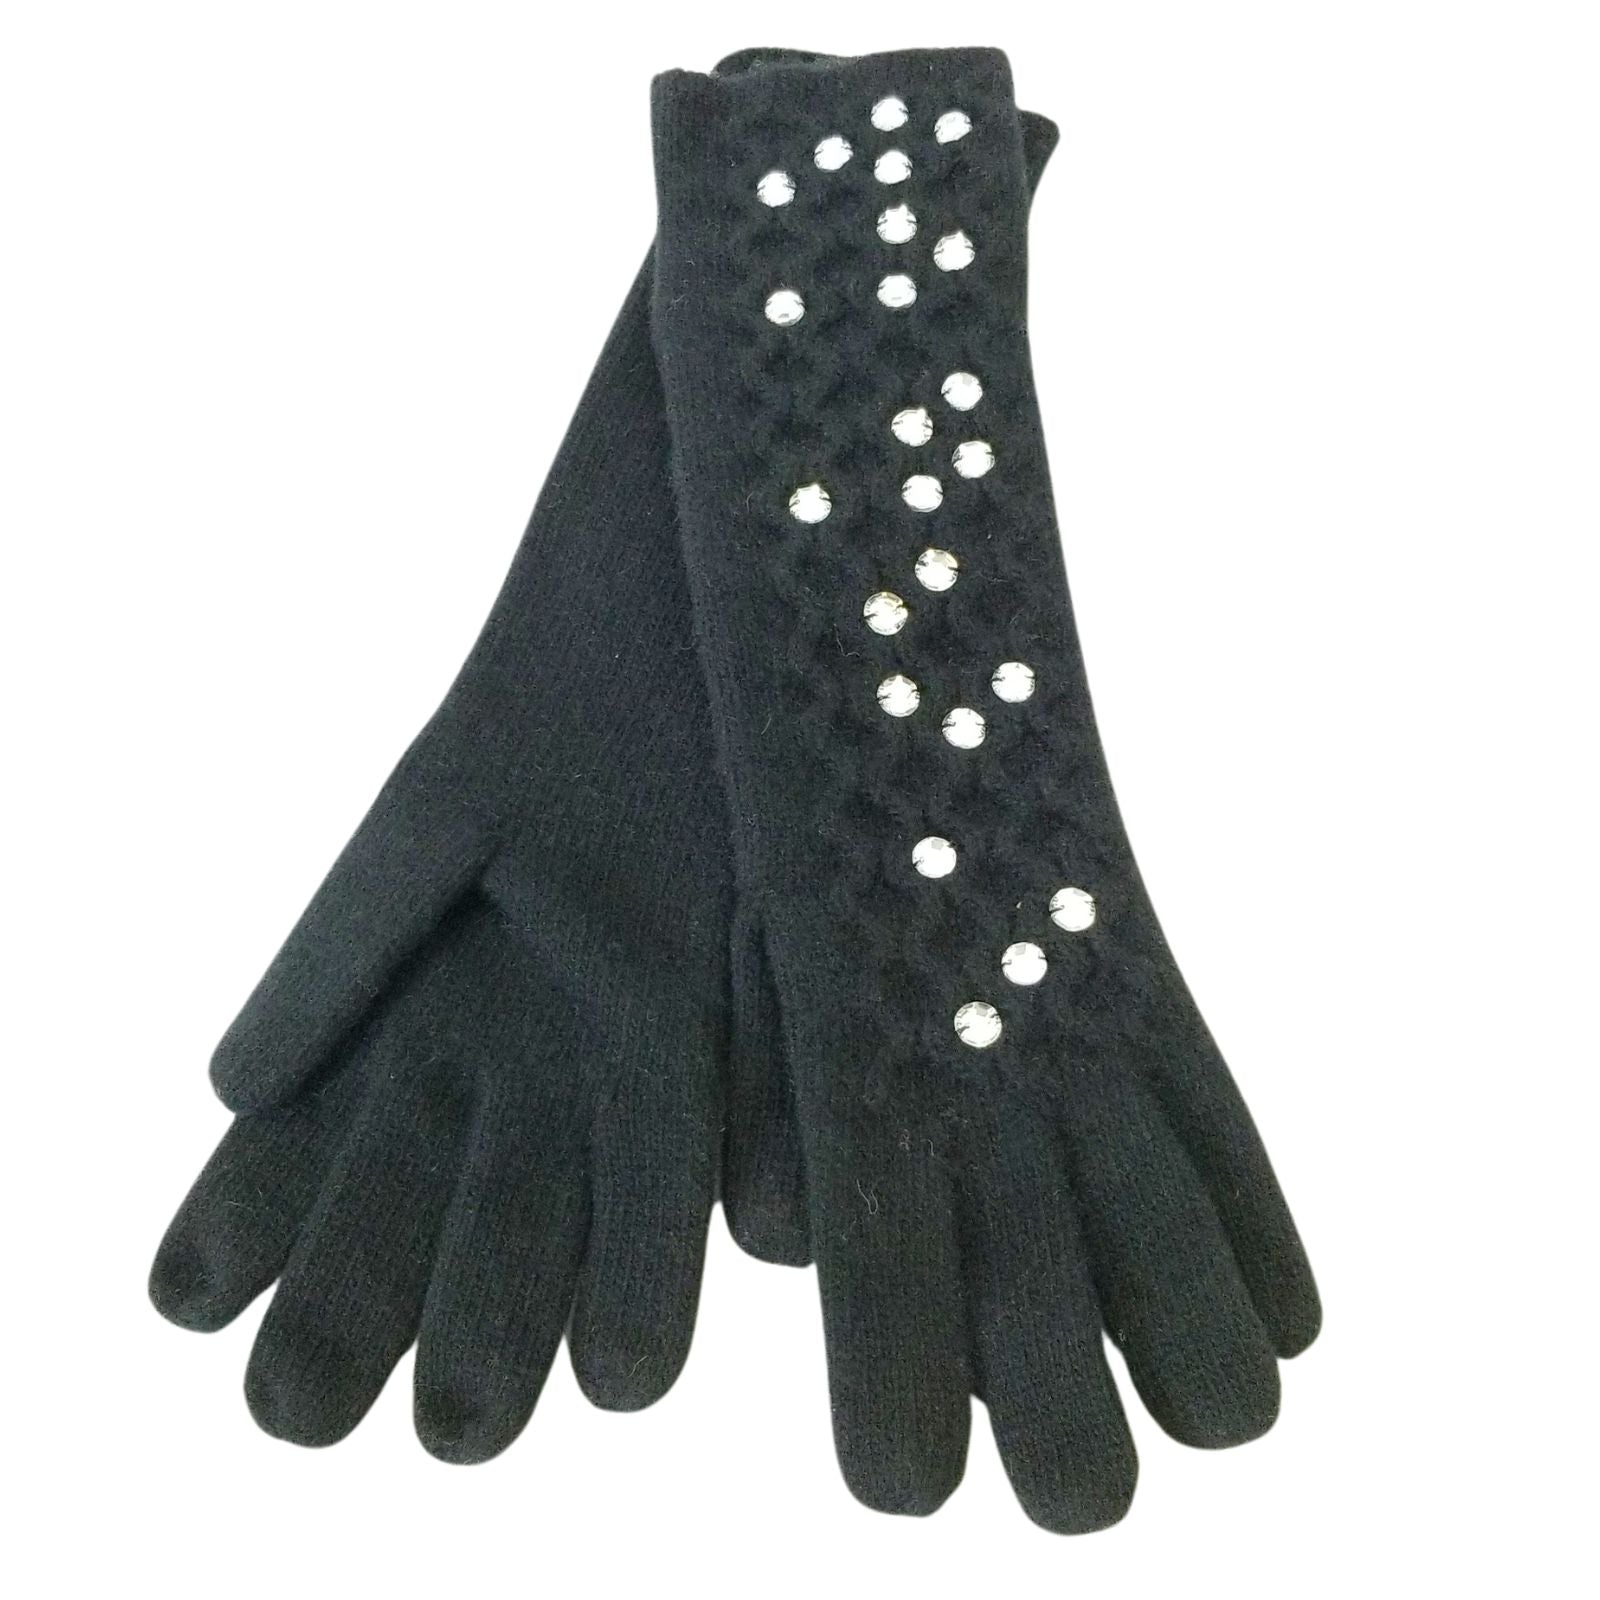 Cashmere glove BLACK longer 12 "   with clear Crystals